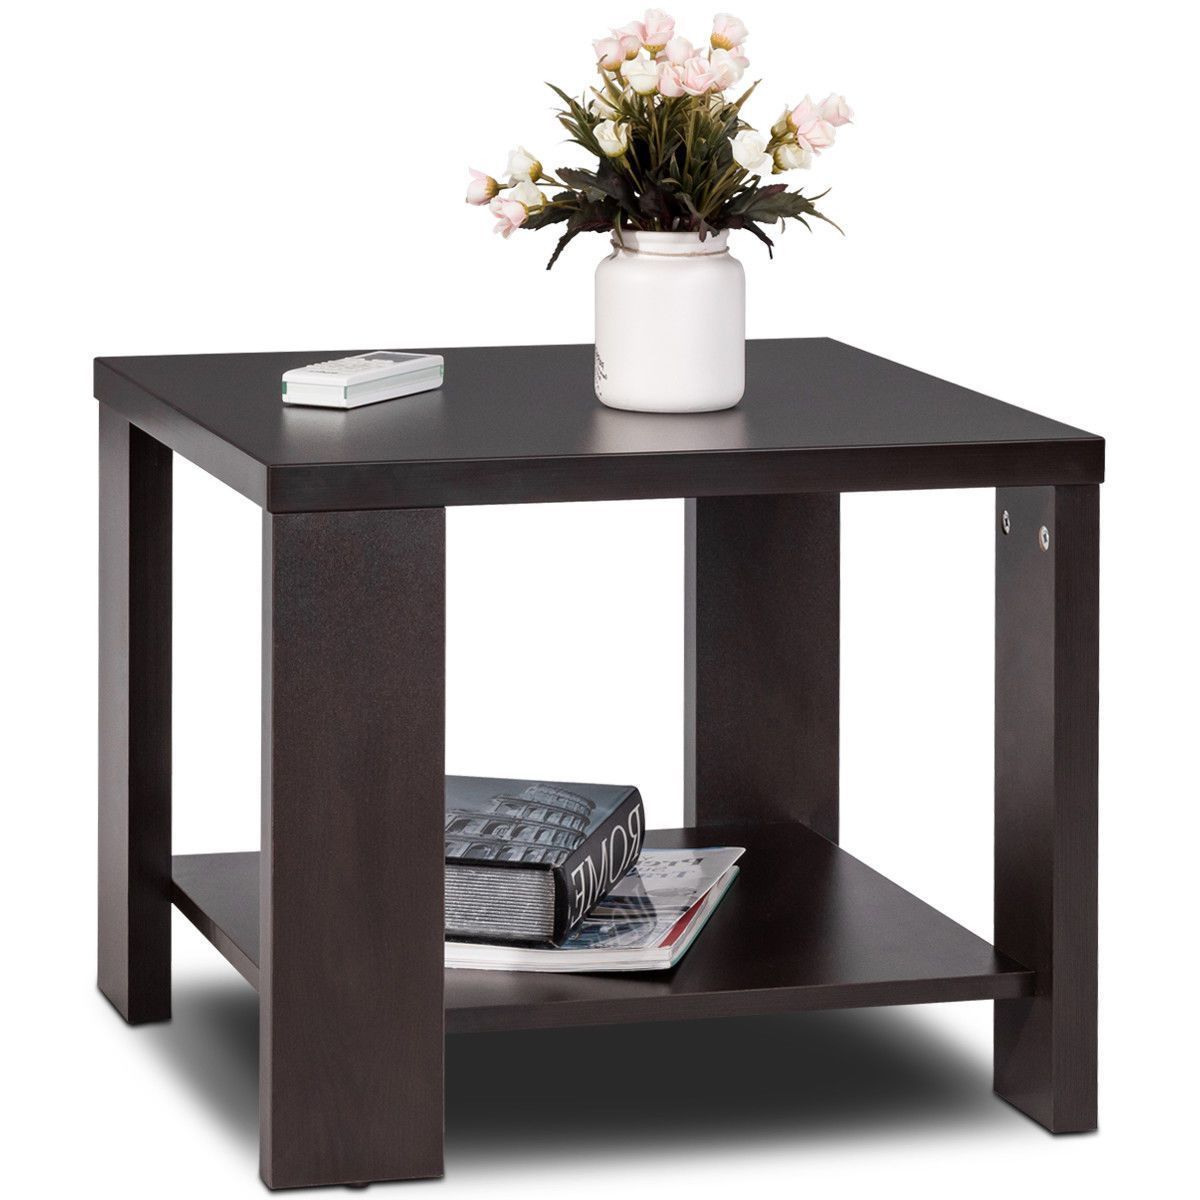 Best And Newest Espresso Wood Storage Console Tables With Coffee Square End Table Sofa (View 10 of 10)